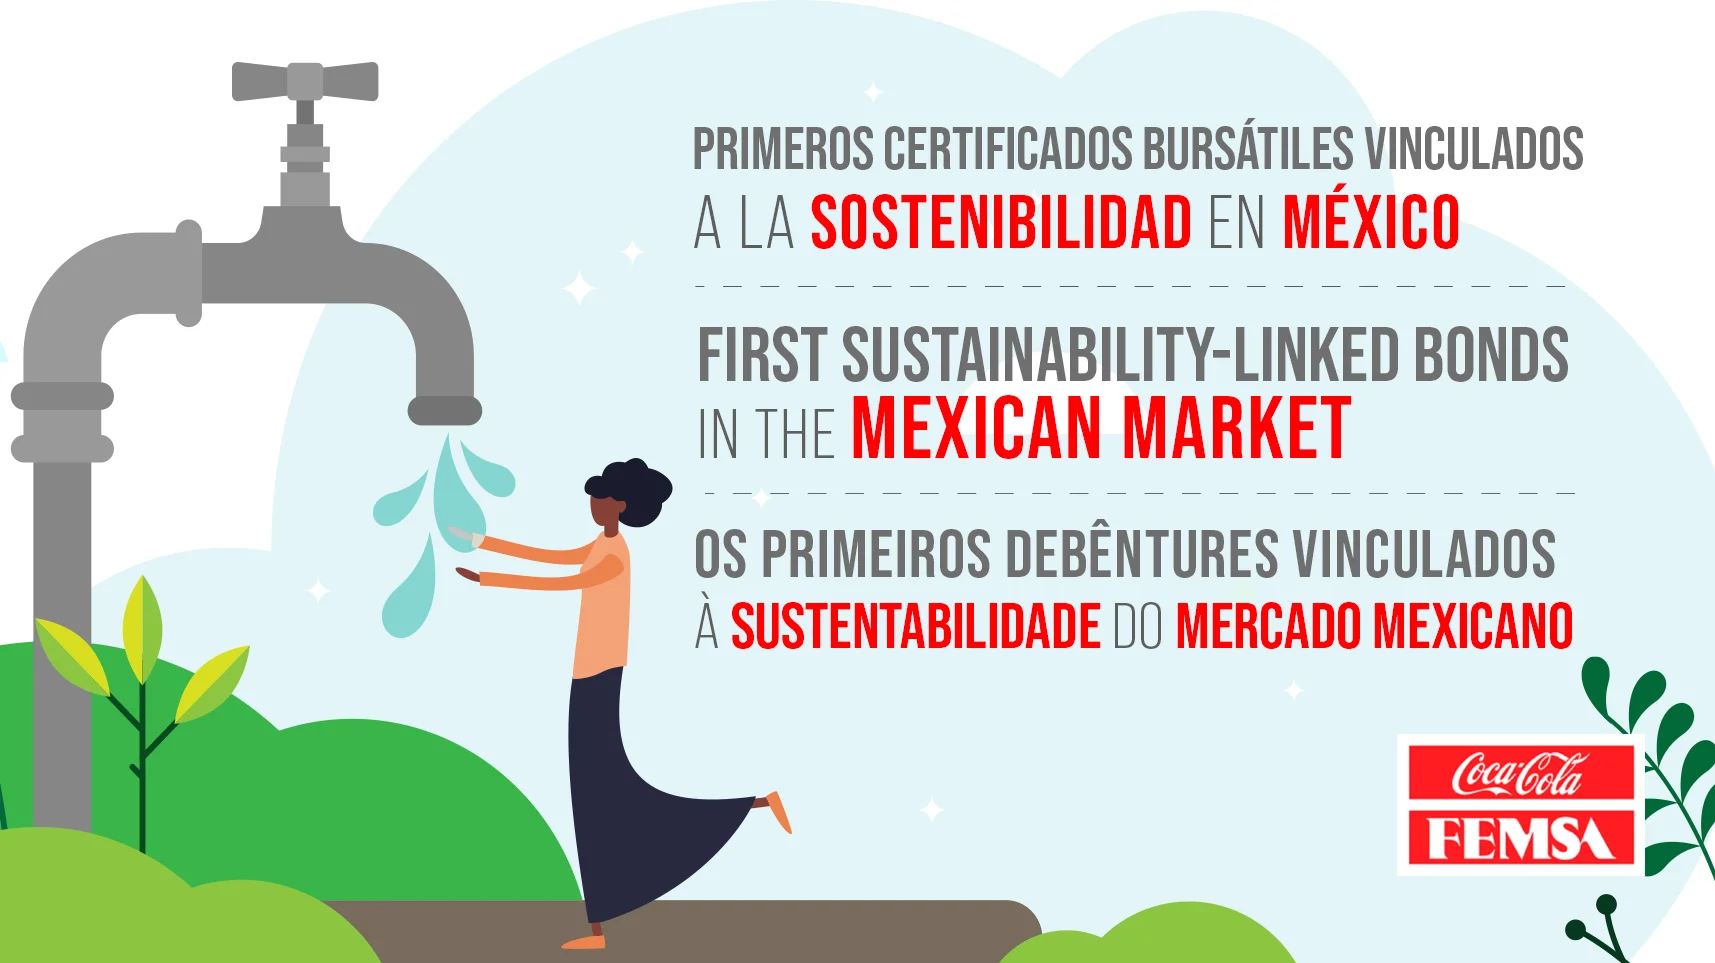 Coca-Cola FEMSA announces successful pricing of the first sustainability-linked bonds in the Mexican market.